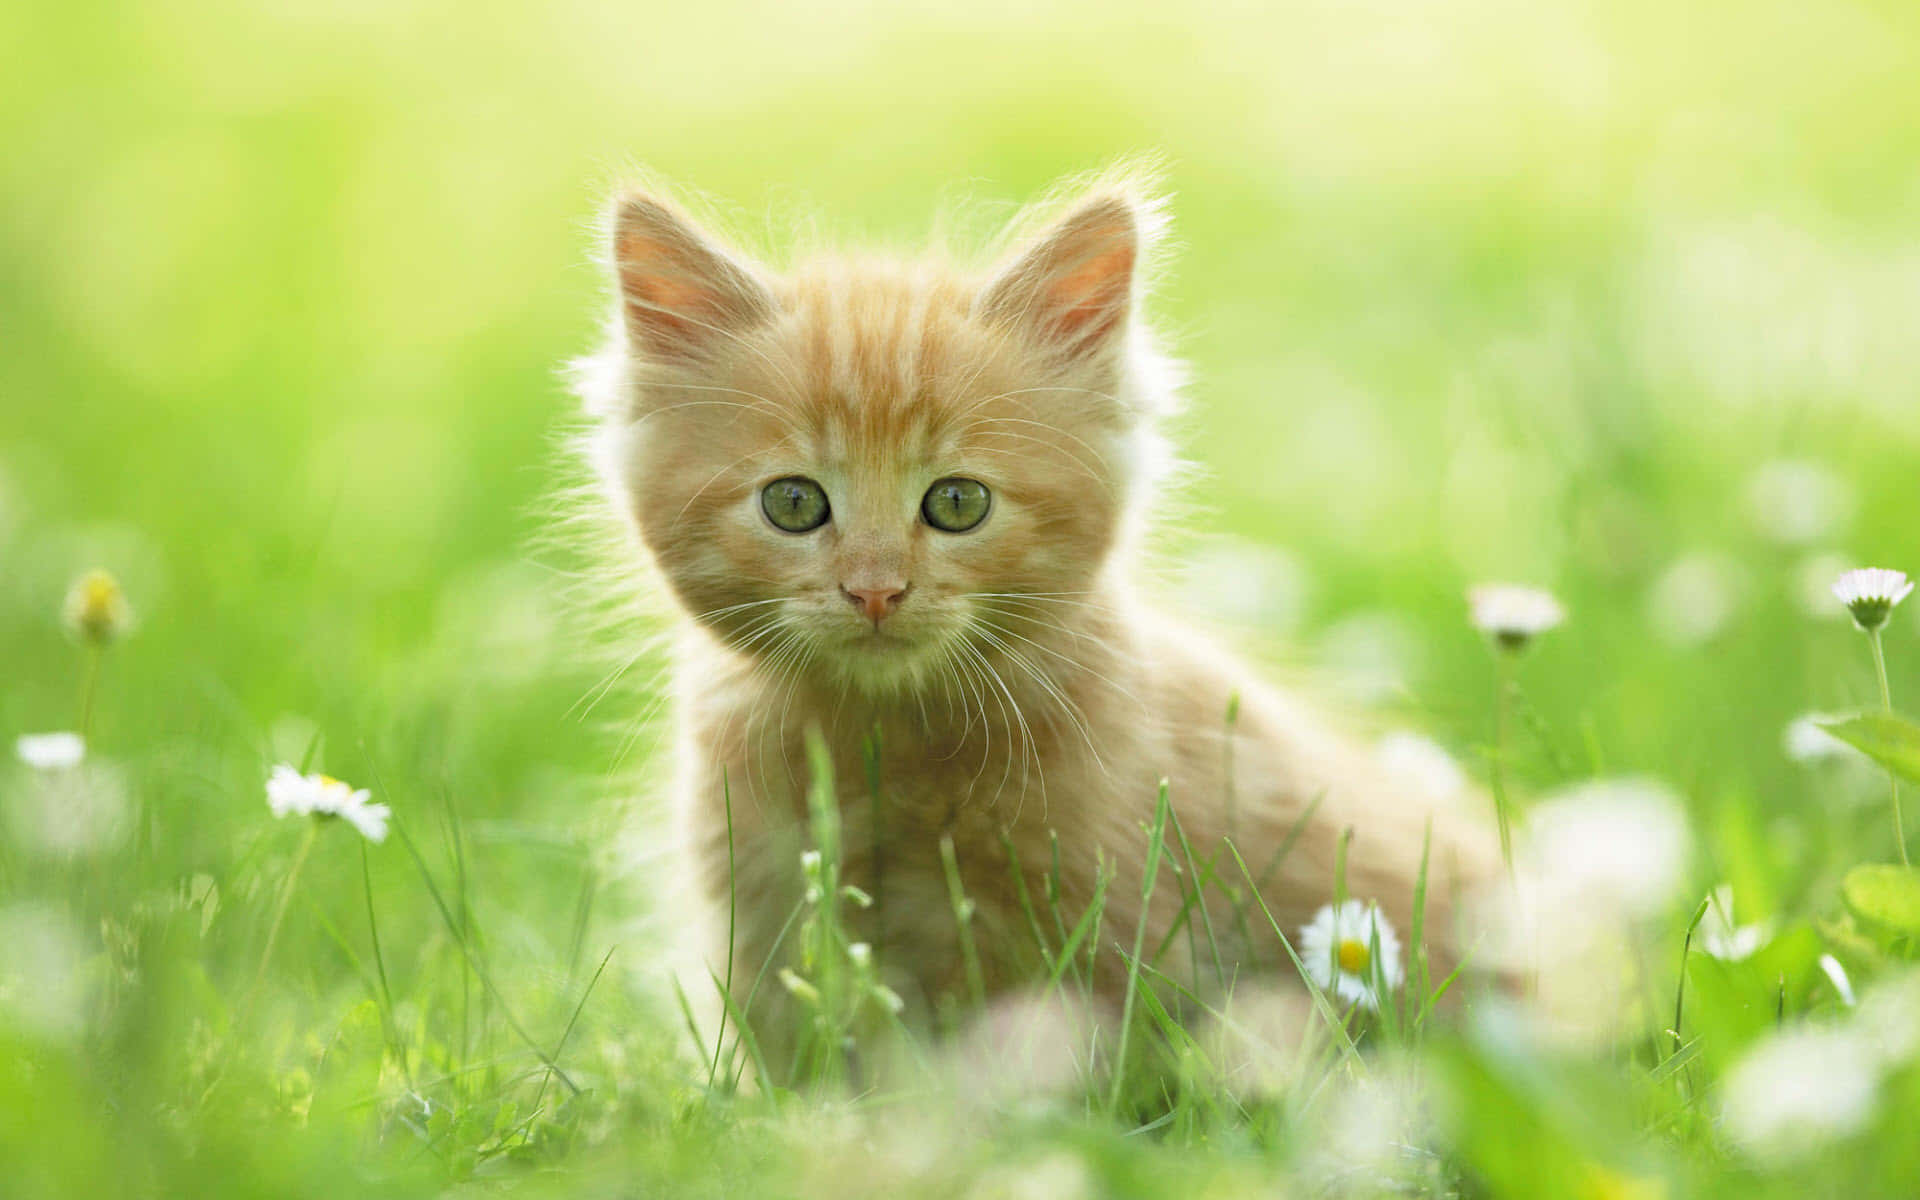 A Kitten Is Sitting In The Grass With Daisies